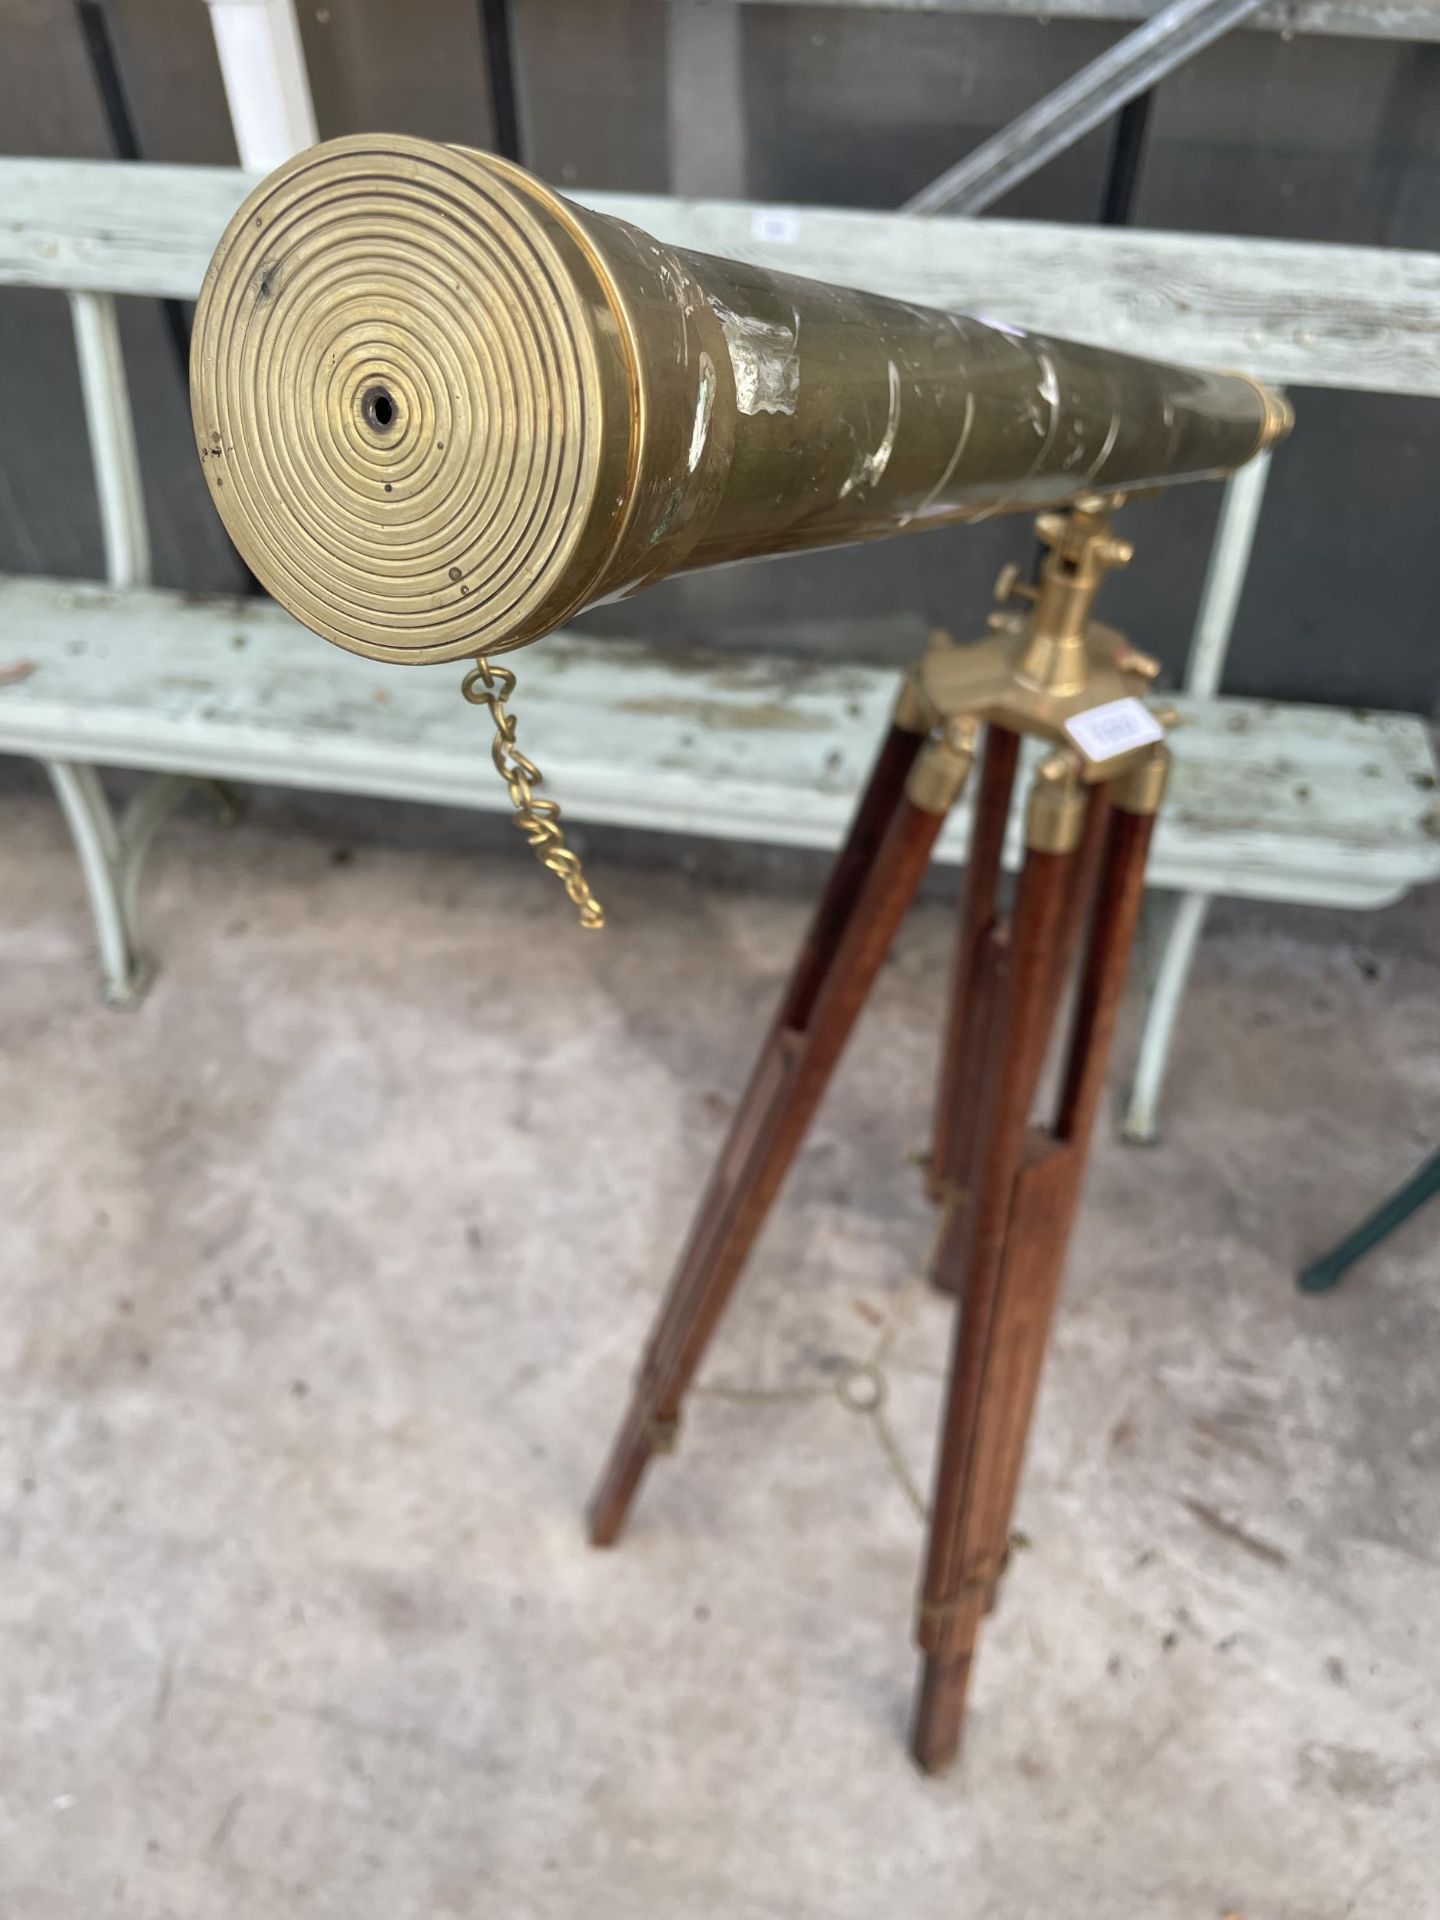 A VINTAGE BRASS TELESCOPE WITH WOODEN TRIPOD STAND - Image 5 of 7